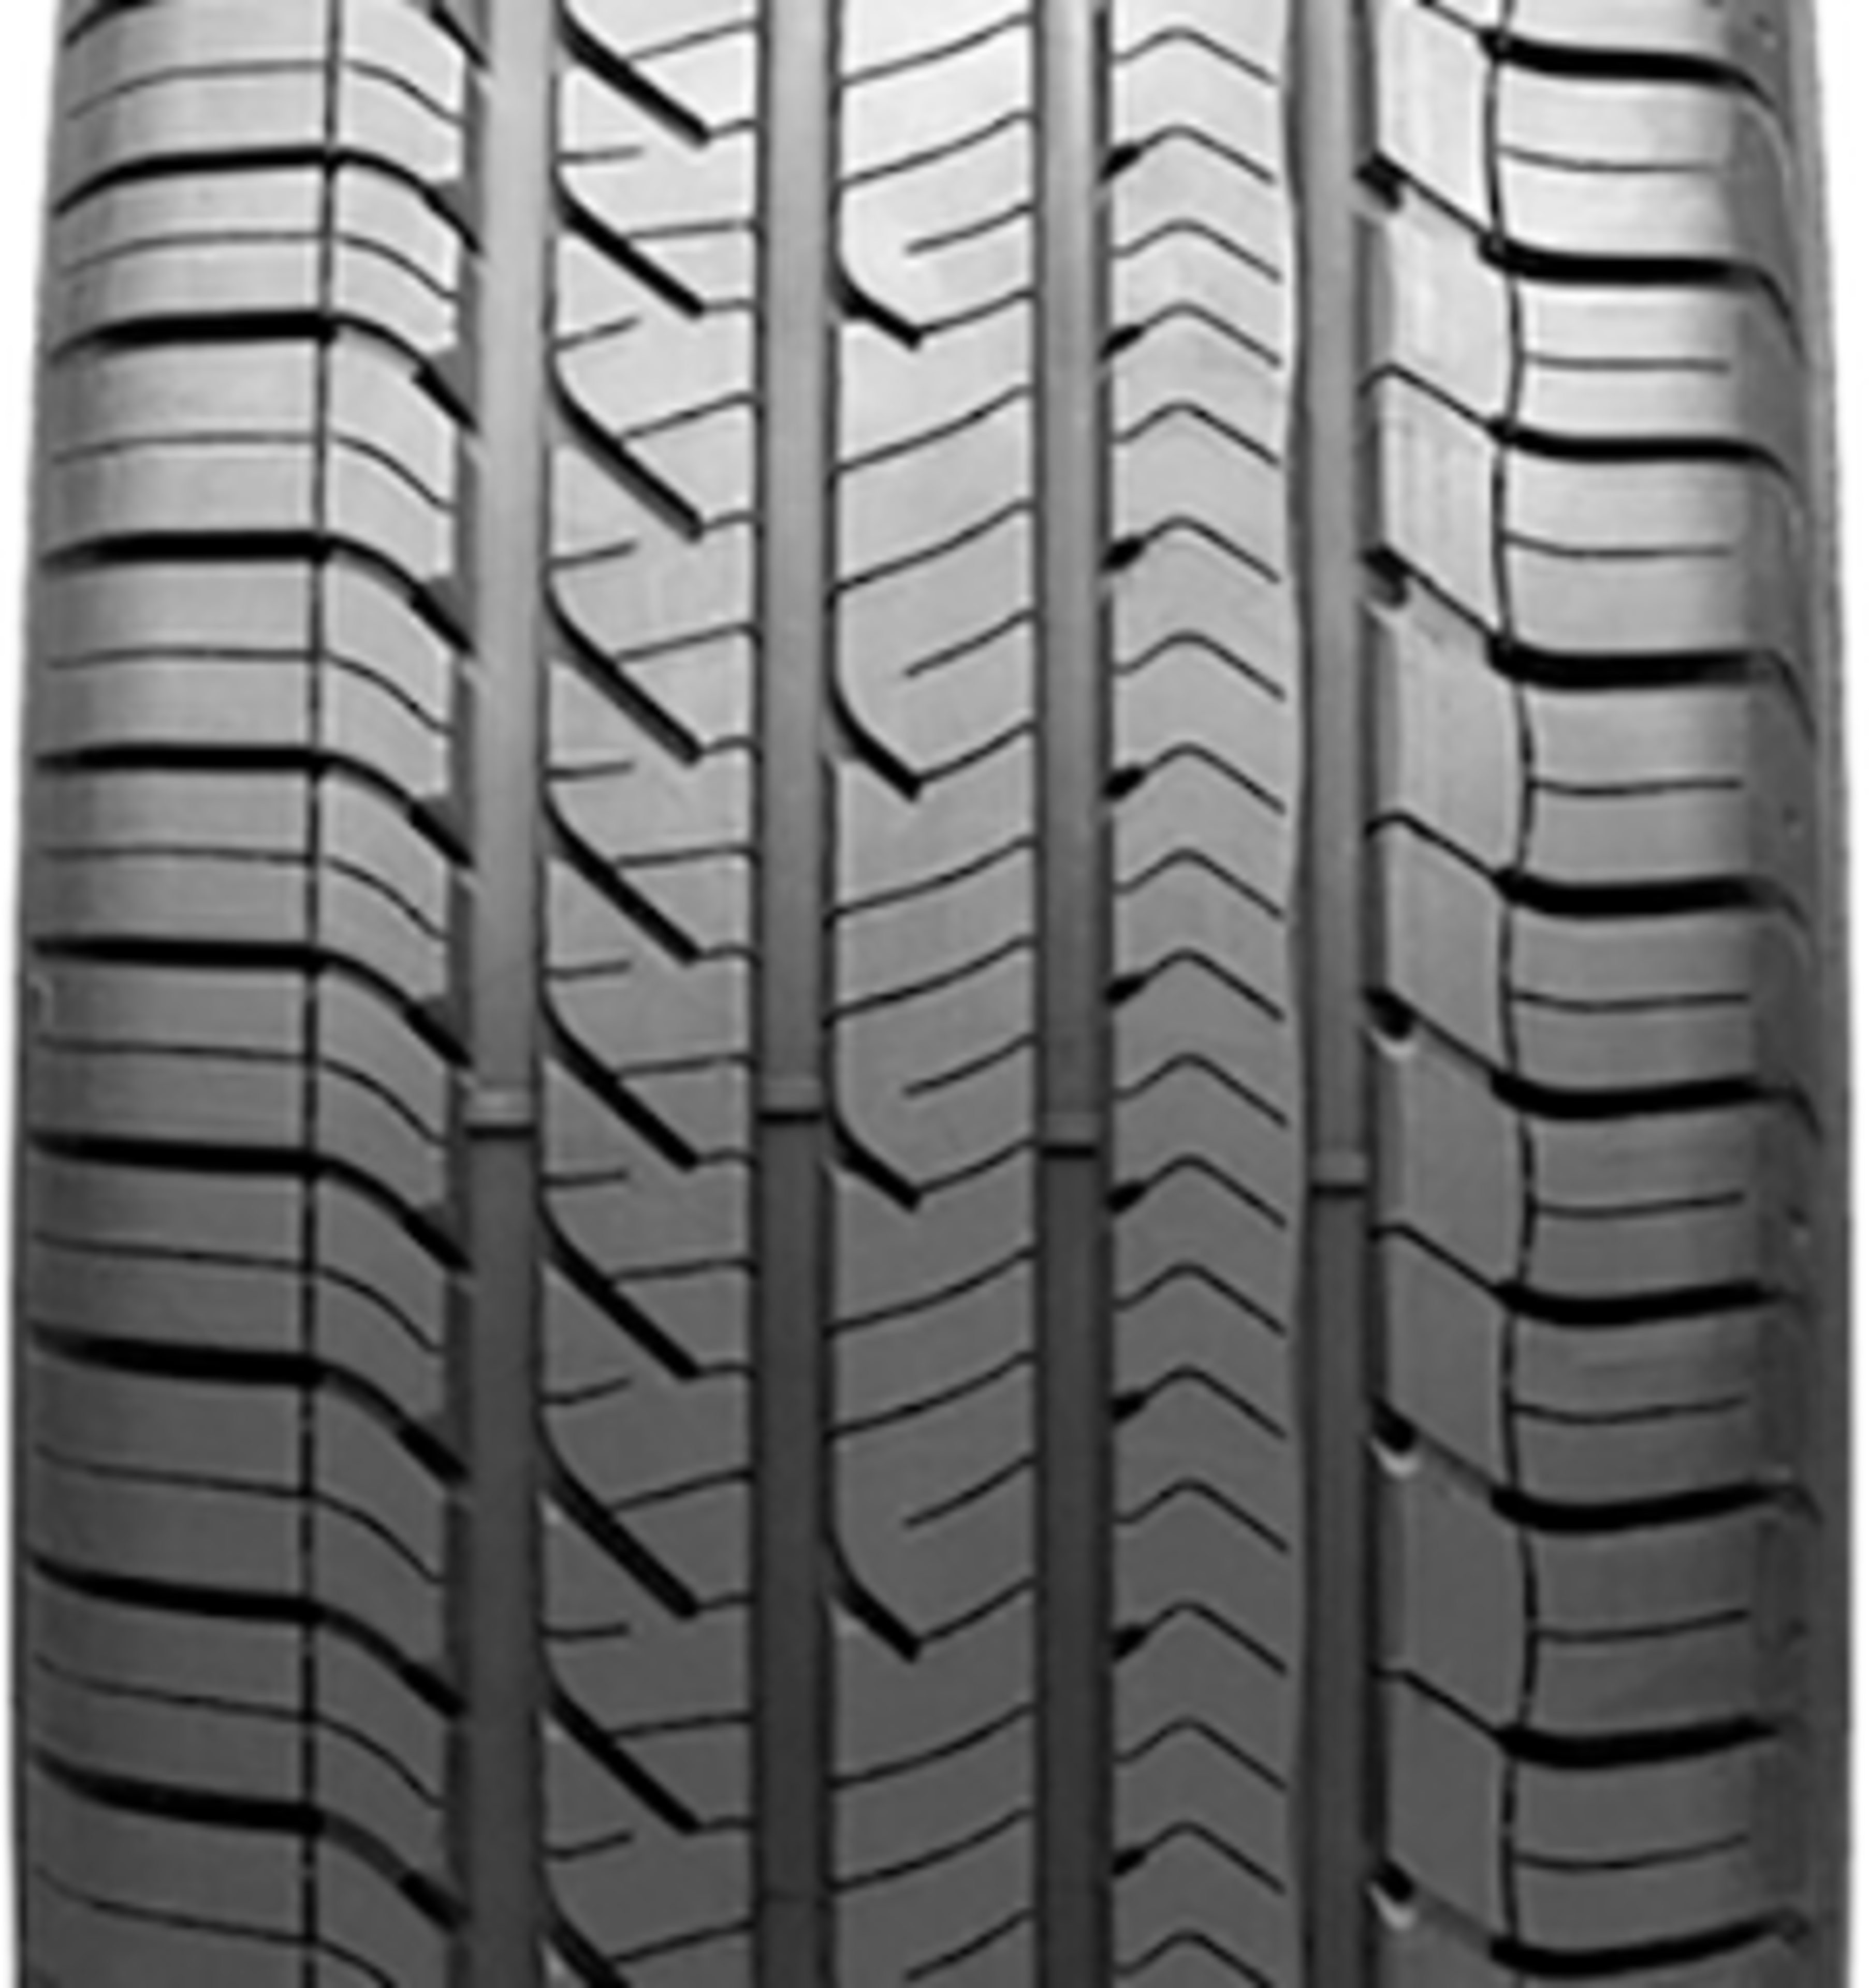 Shop New or Used 205/45R17 Tires: Free Shipping